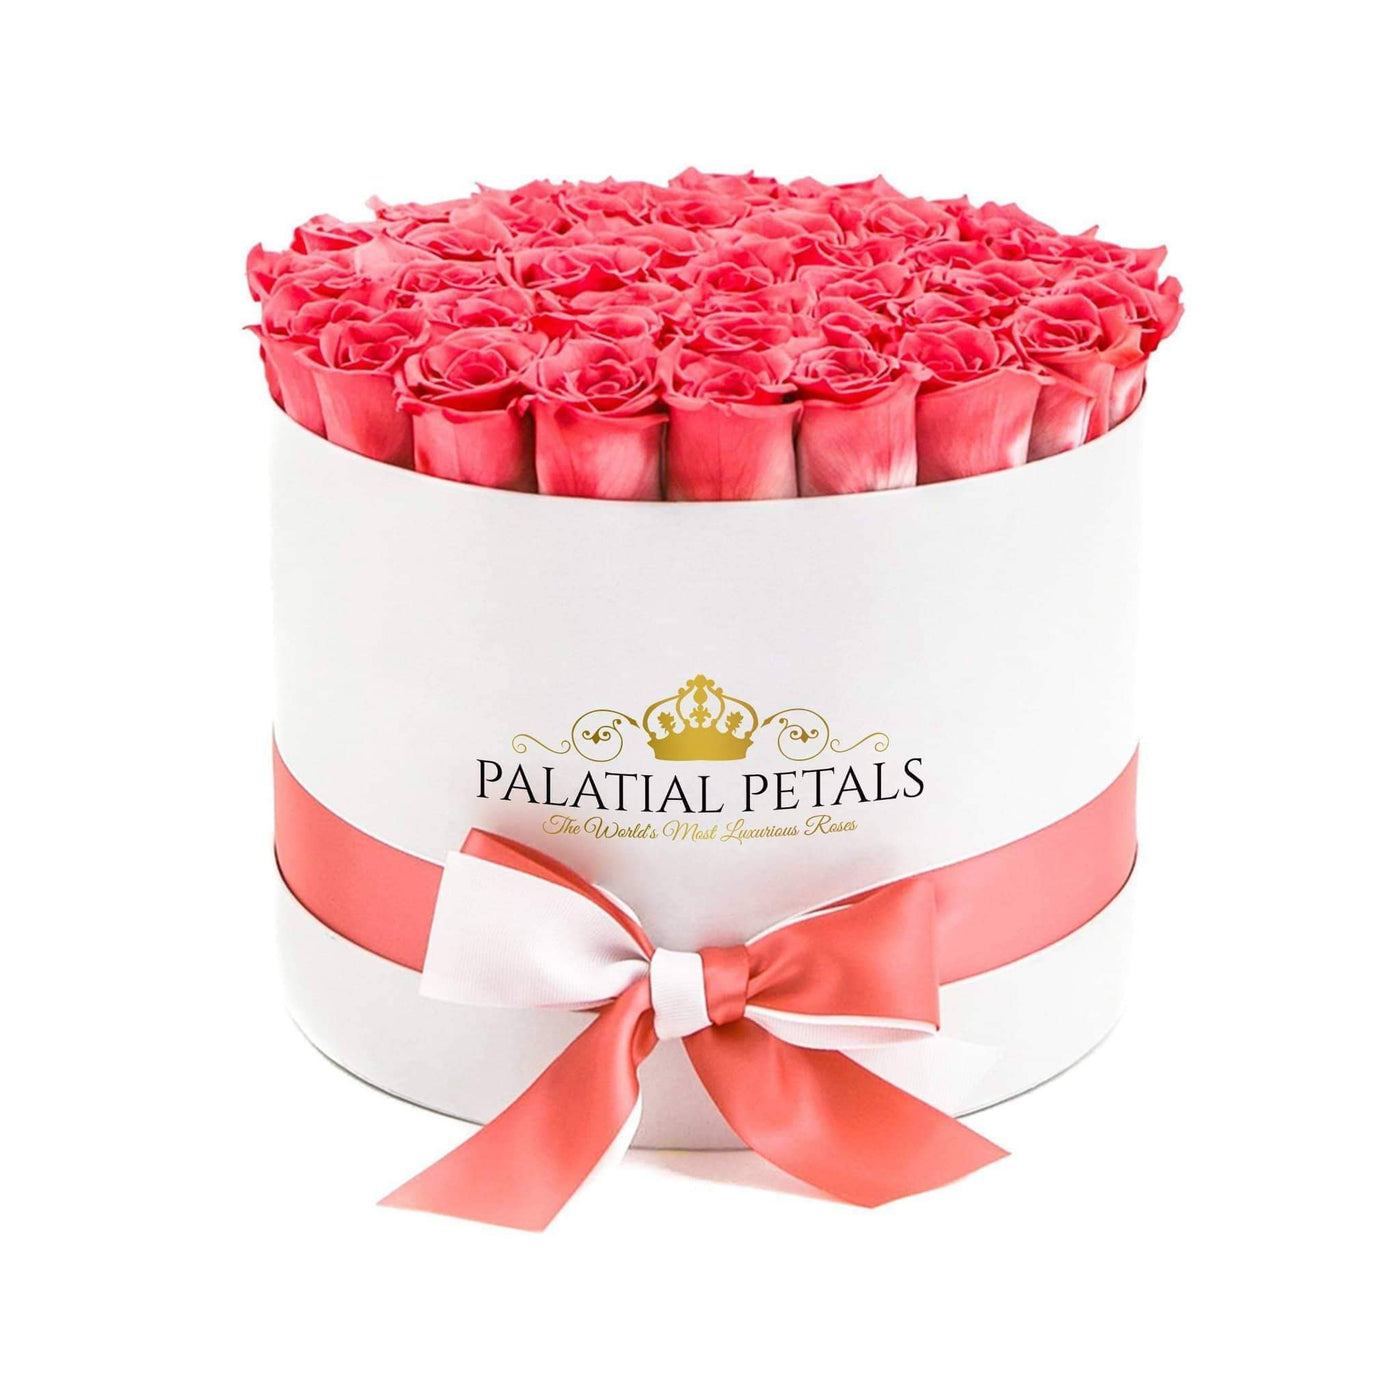 Coral Pink Roses That Last A Year - Grande Rose Box